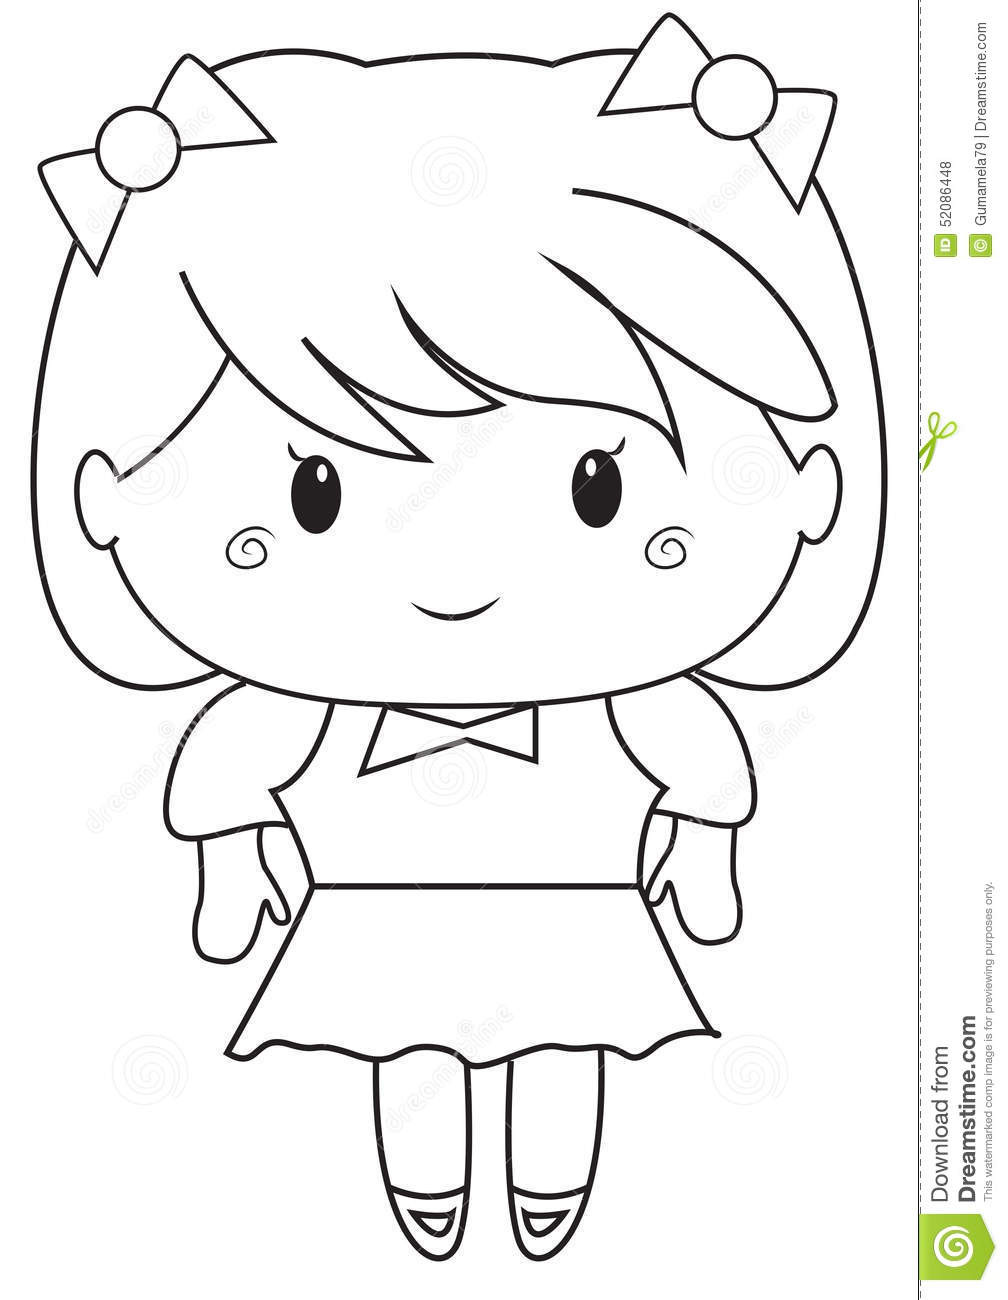 coloring pages for little girls